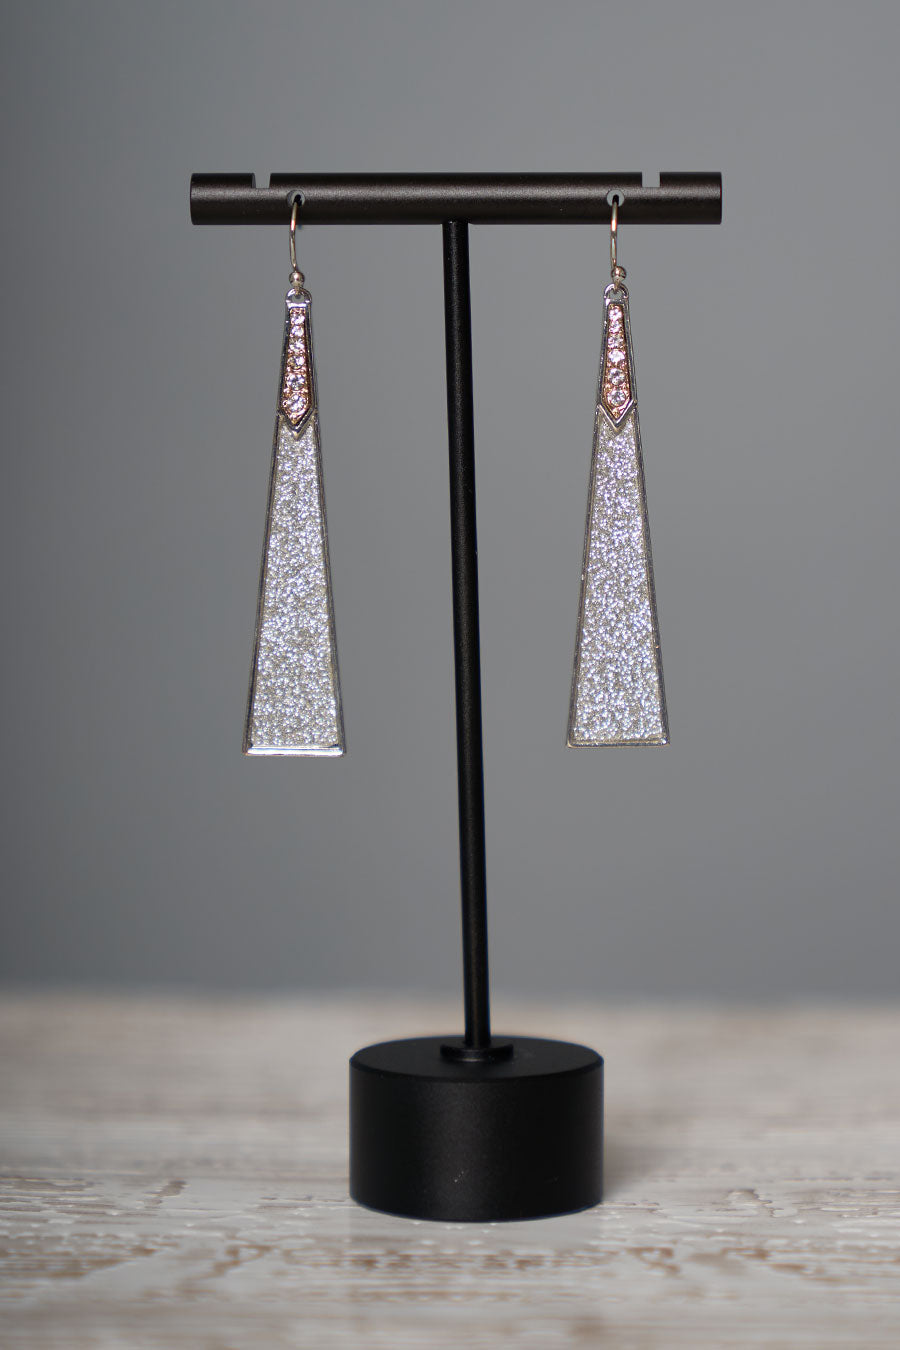 A Touch Of Sparkle Earrings Profile